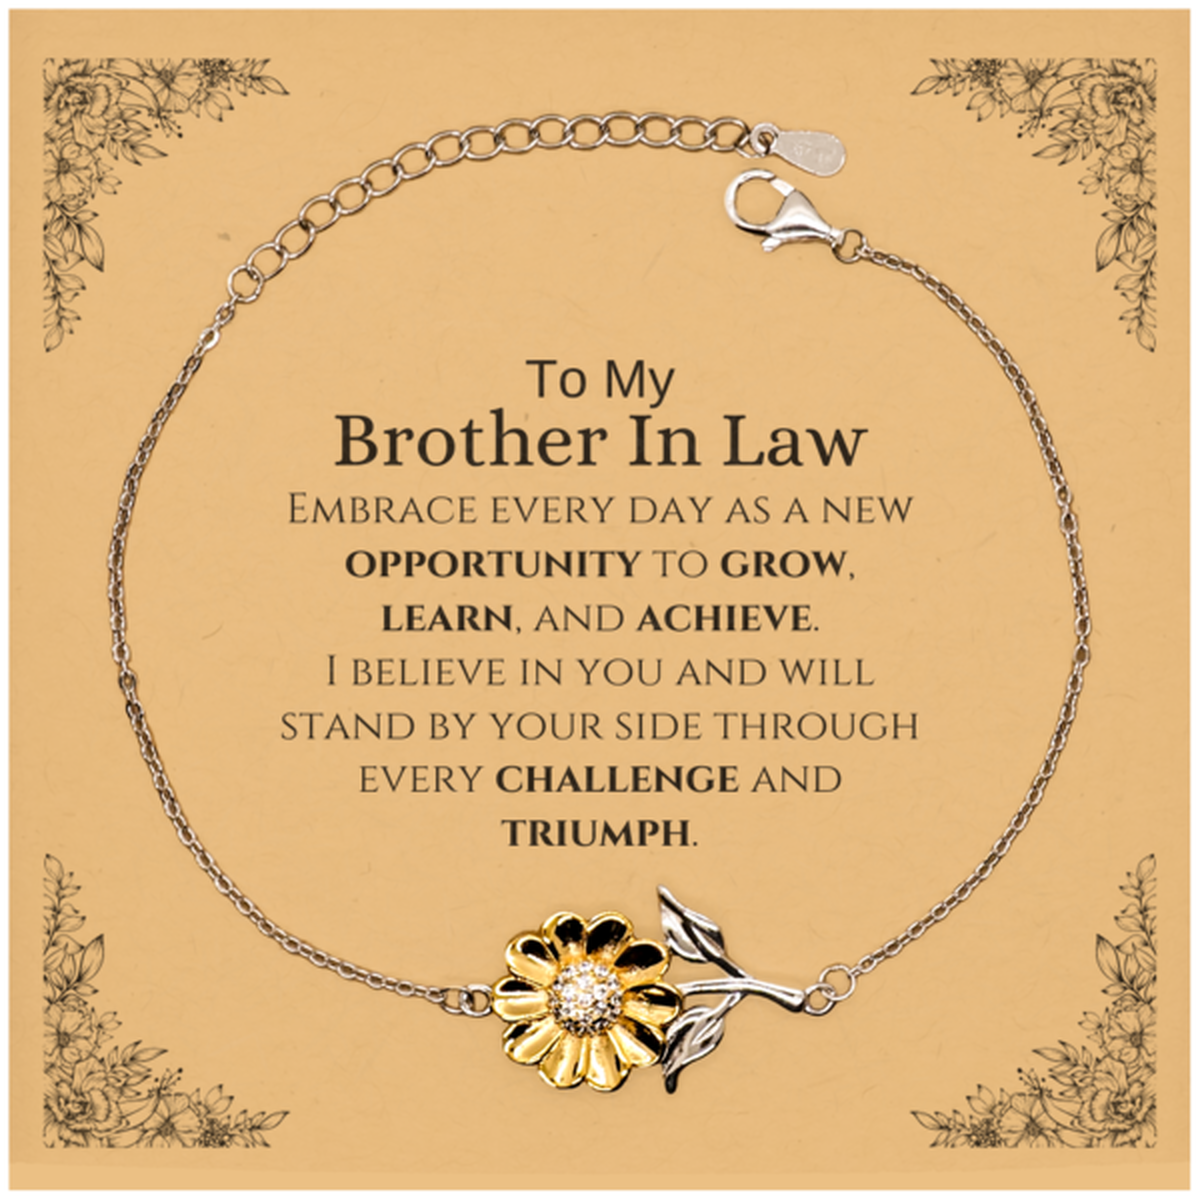 To My Brother In Law Gifts, I believe in you and will stand by your side, Inspirational Sunflower Bracelet For Brother In Law, Birthday Christmas Motivational Brother In Law Gifts